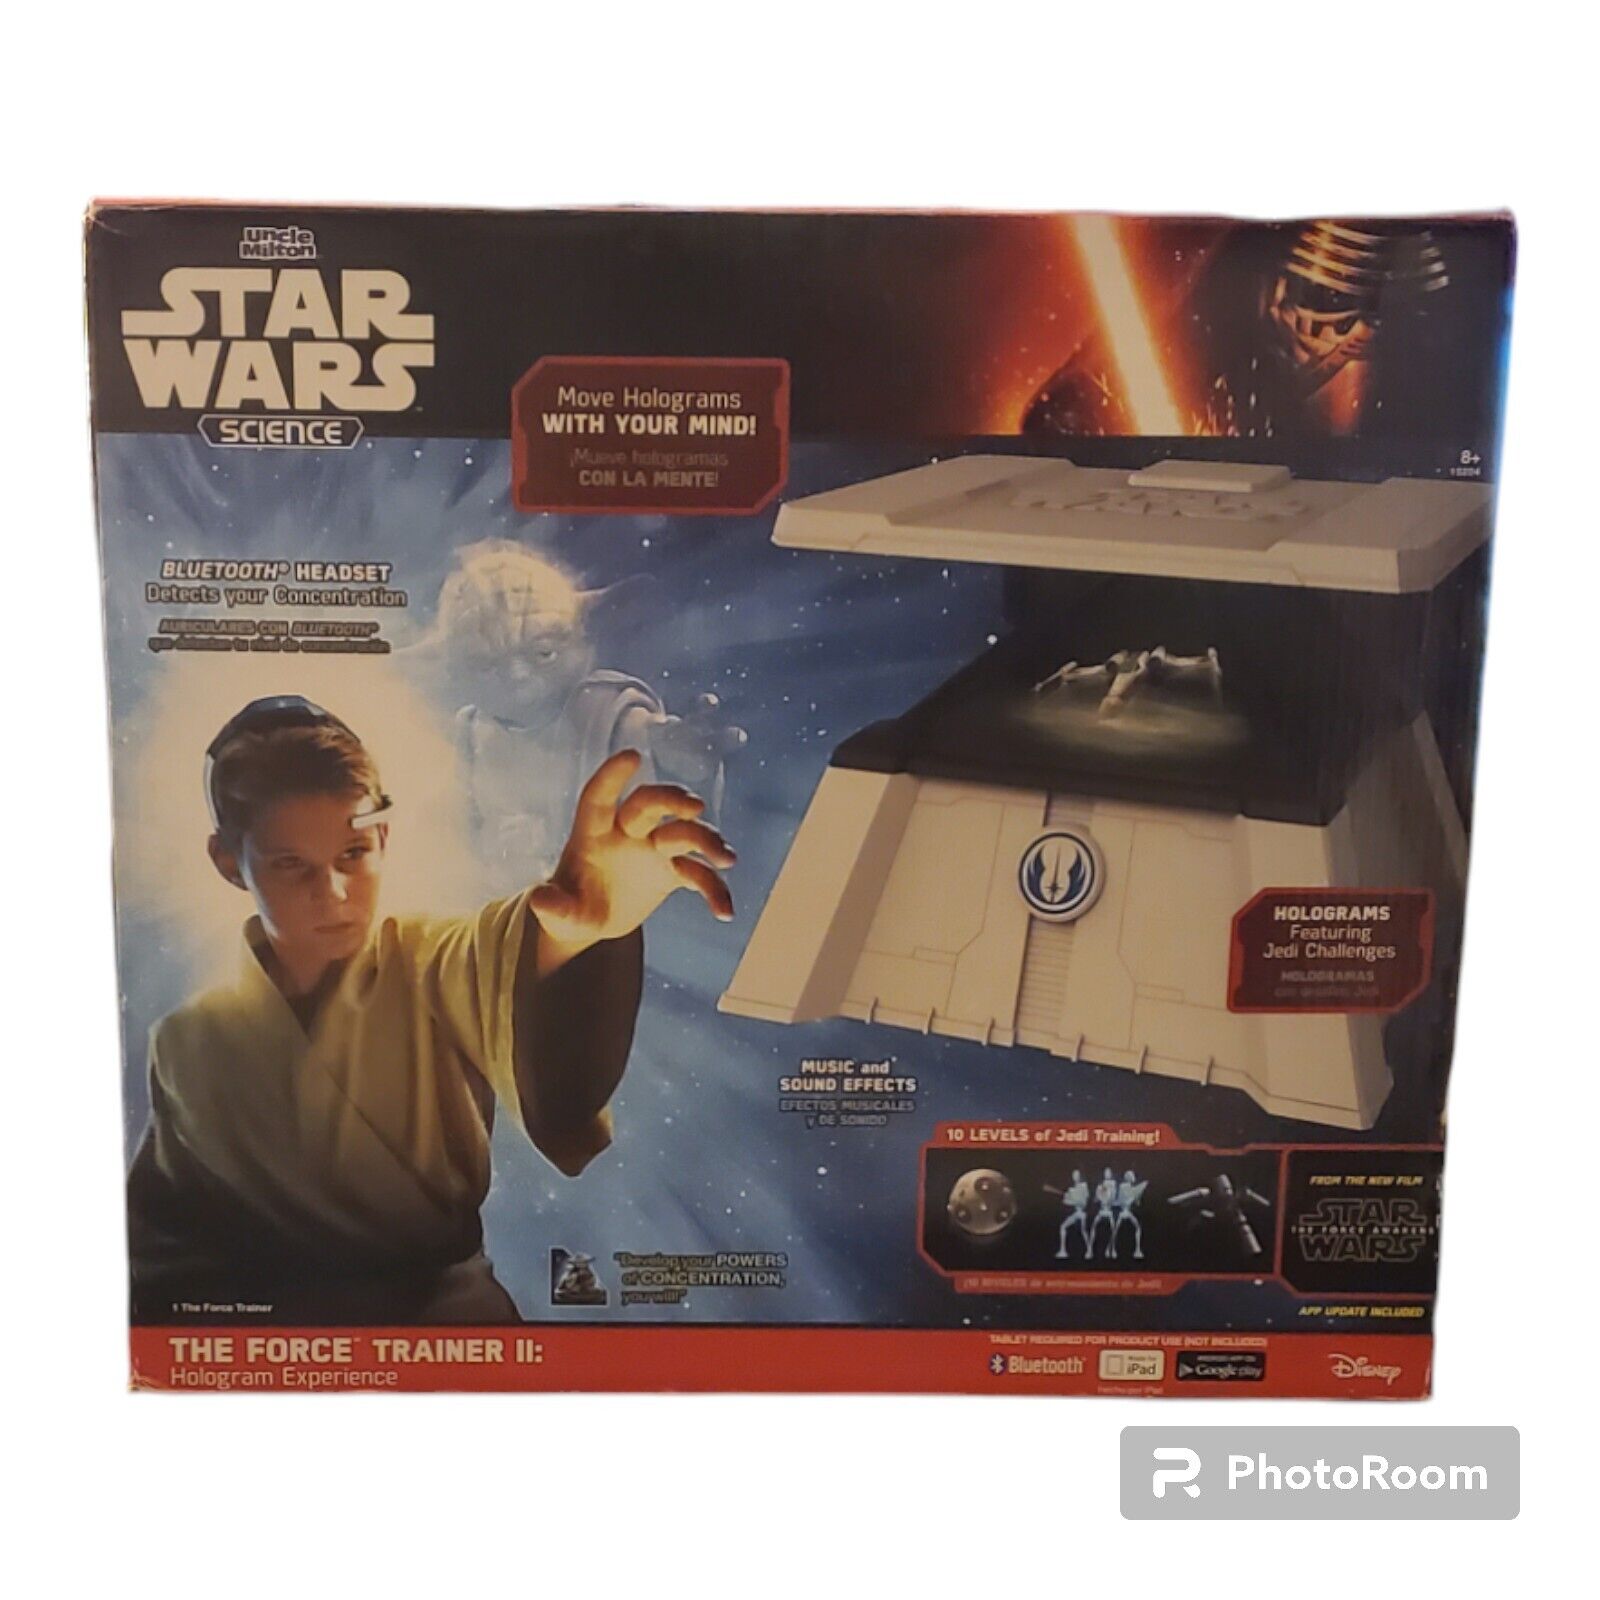 NEW Star Wars The Force Trainer II Hologram Experience Uncle Milton SEALED